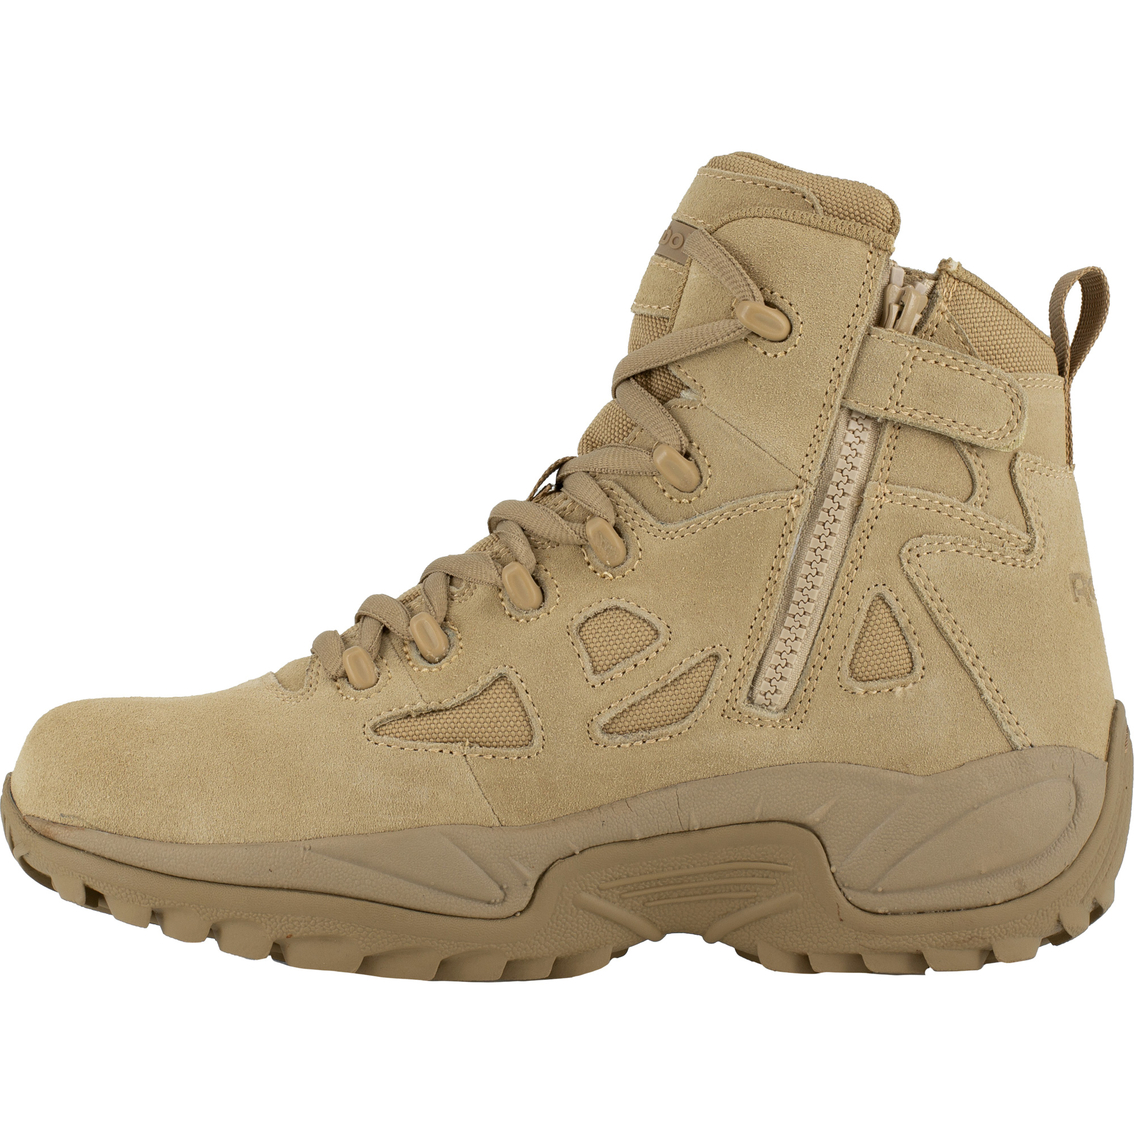 Reebok Rapid Response 6 In. Stealth Boots | Men's Shoes | Shoes | Shop ...